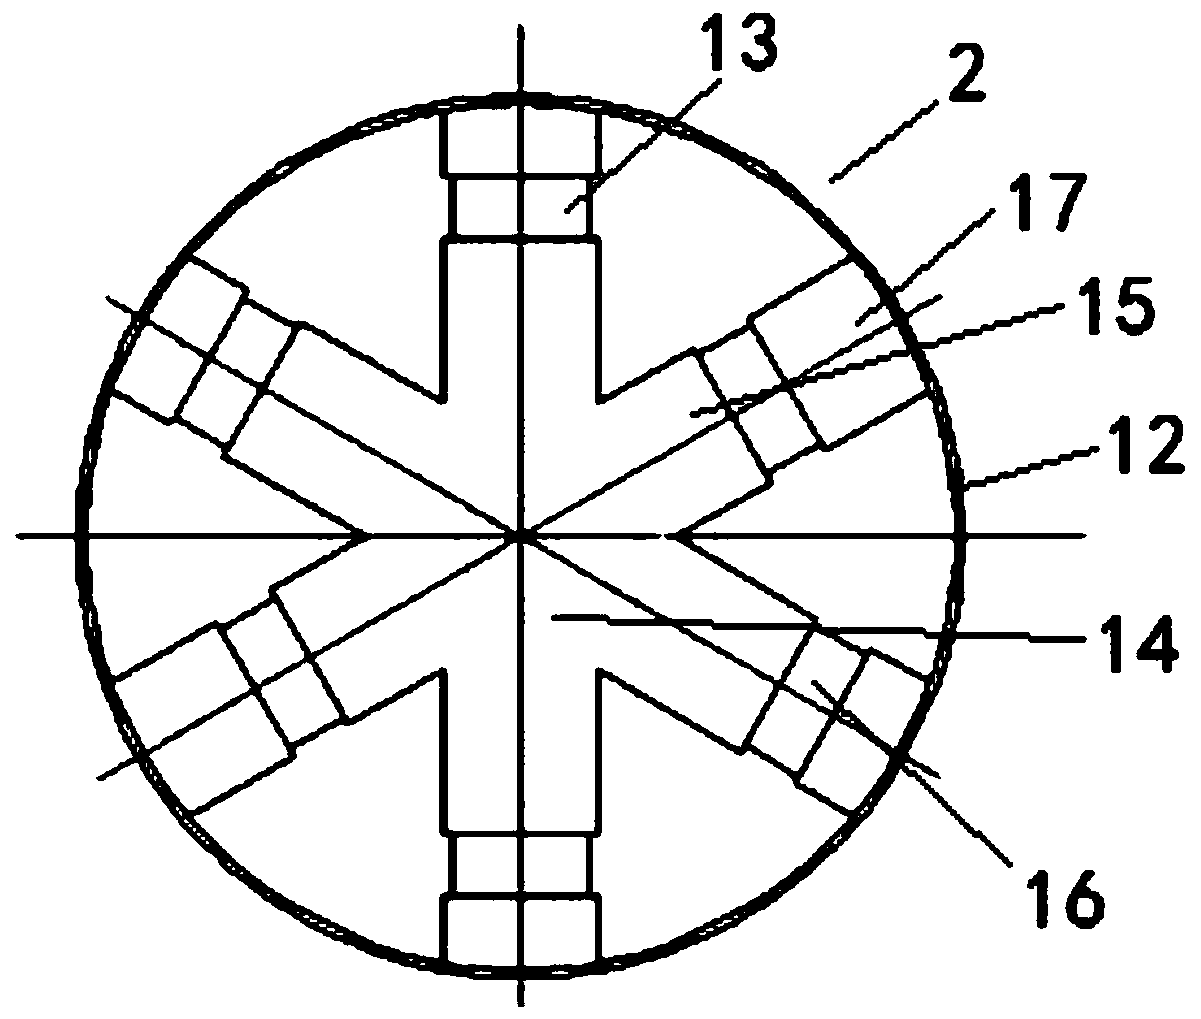 Shield underground butt-jointing structure and construction method